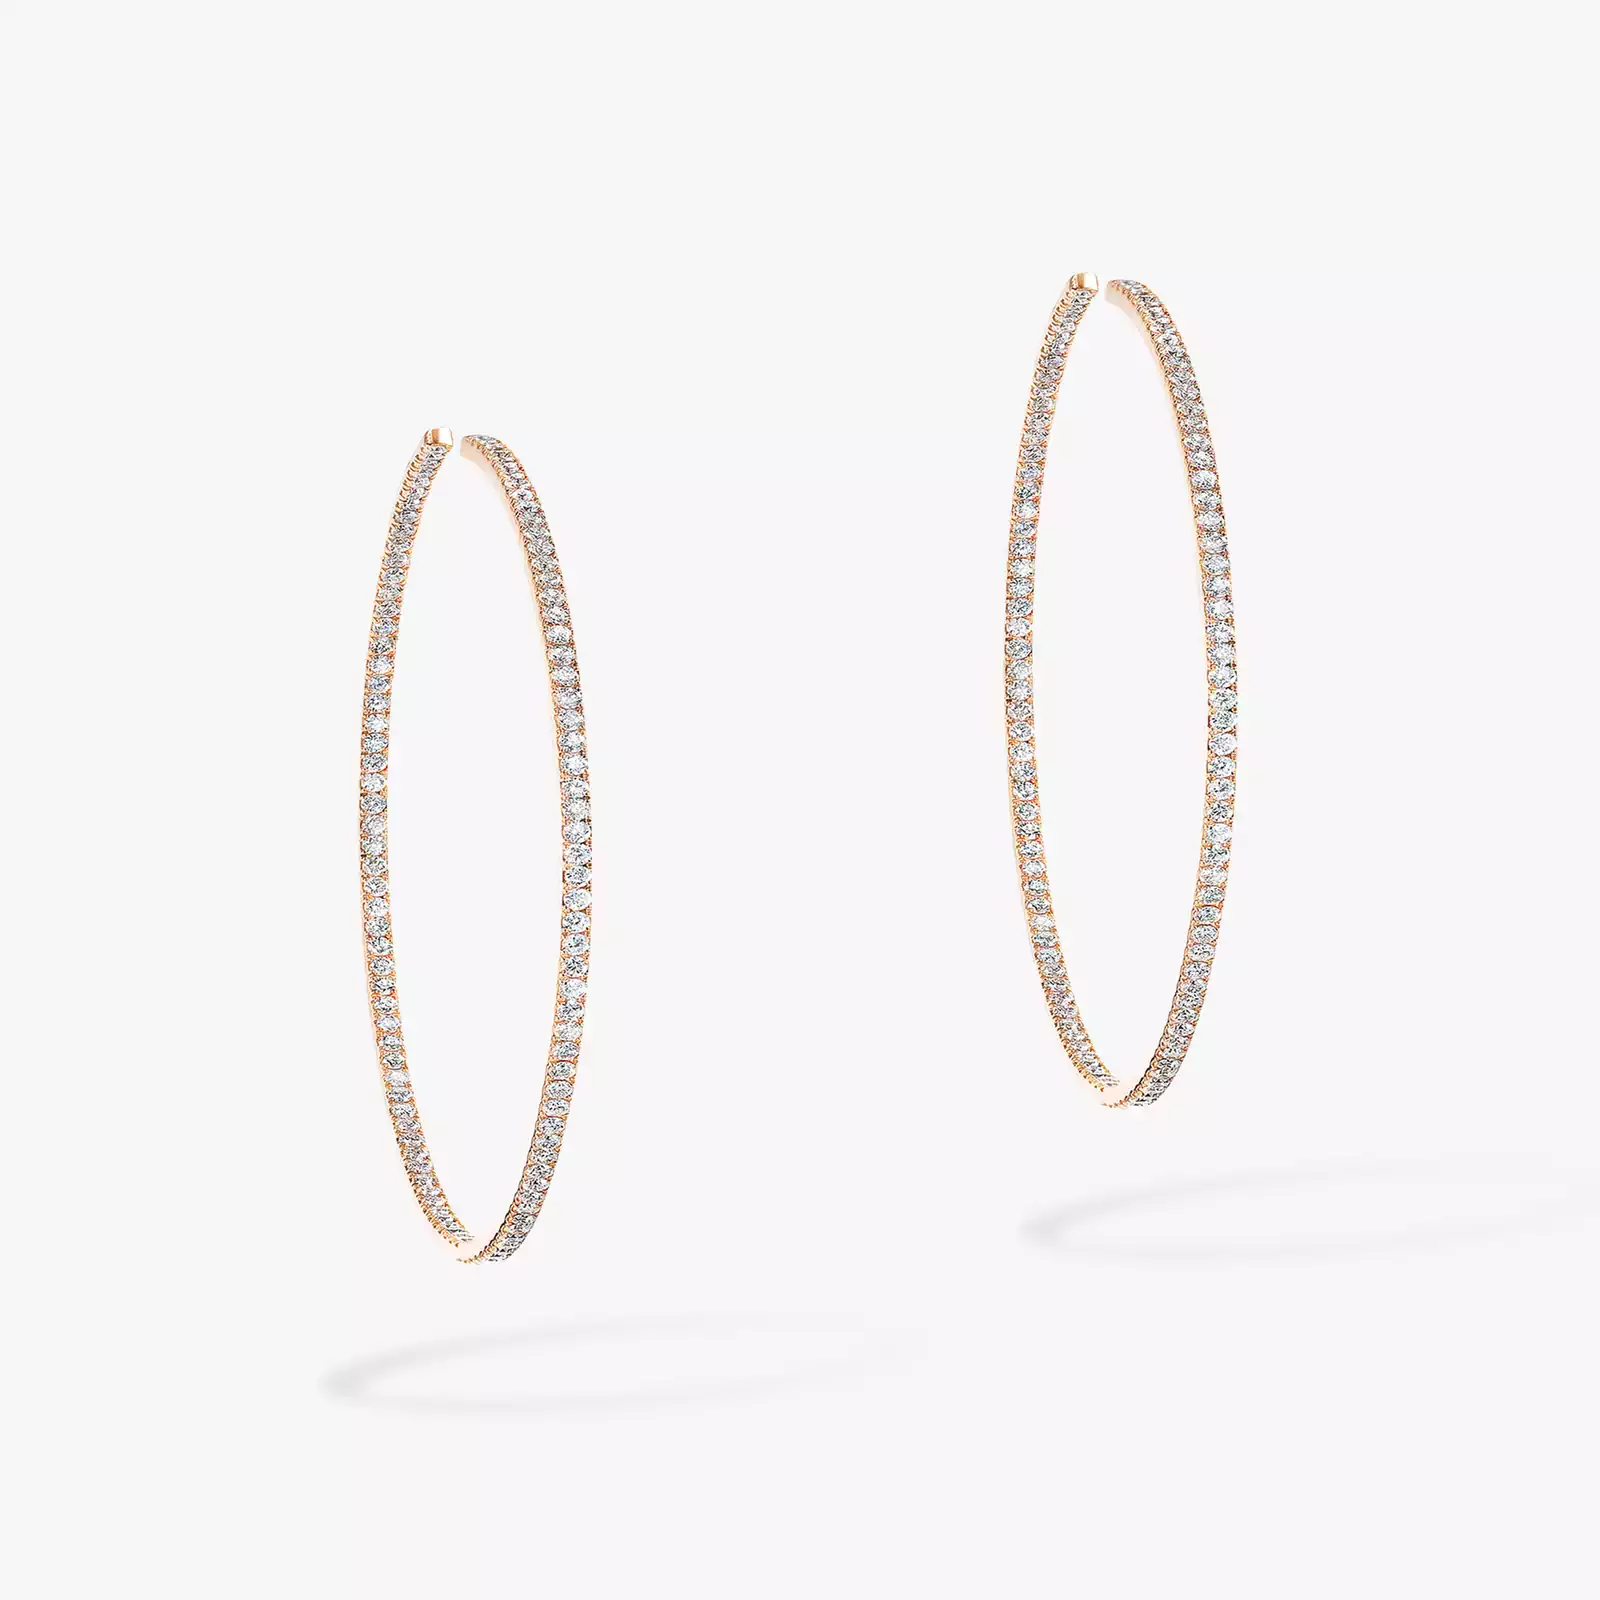 Gatsby Small Hoop Pink Gold For Her Diamond Earrings 04686-PG